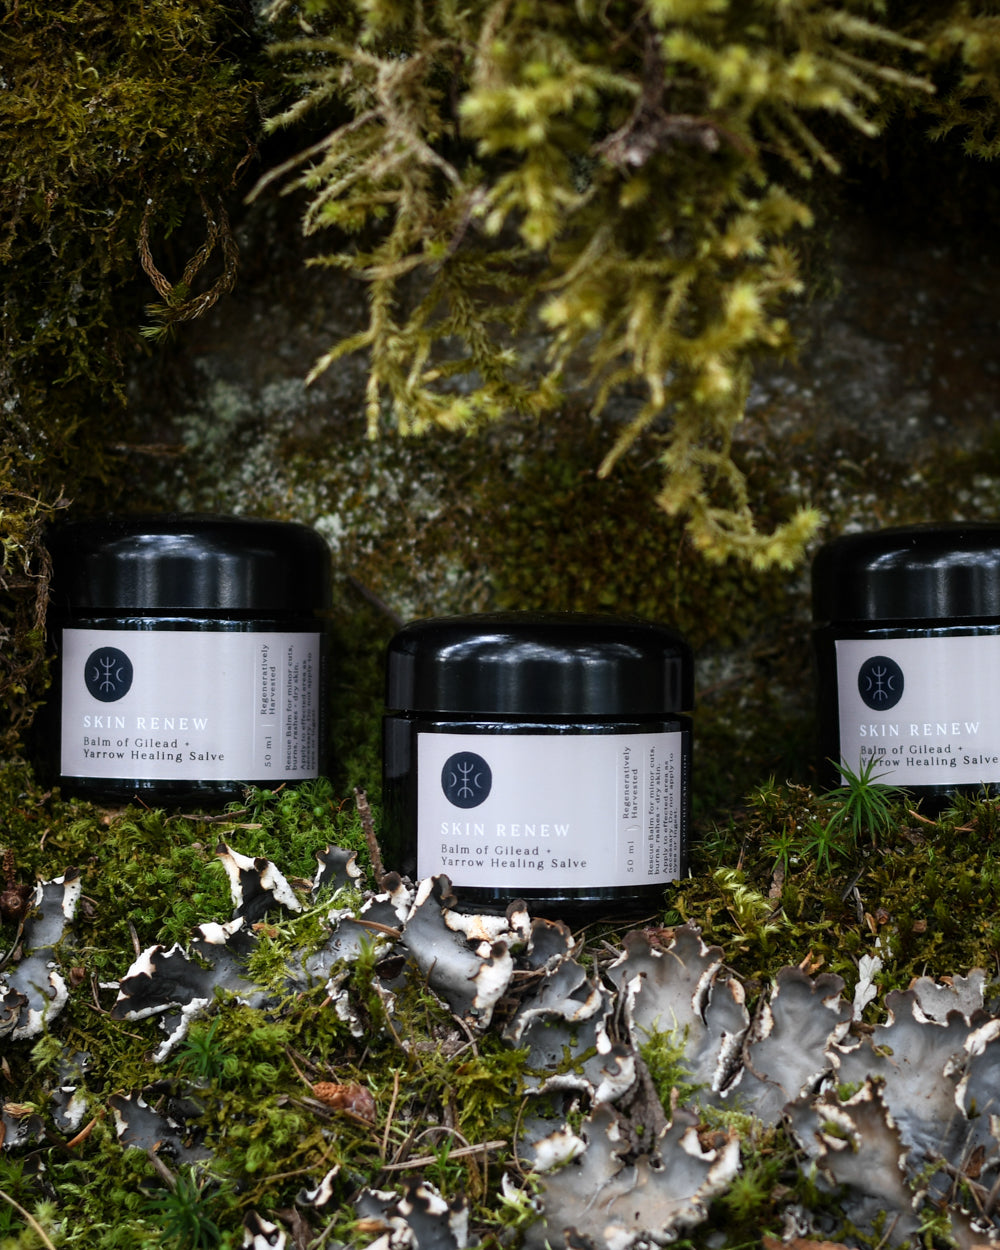 Three jars of skin renew by o apothecary resting in the moss